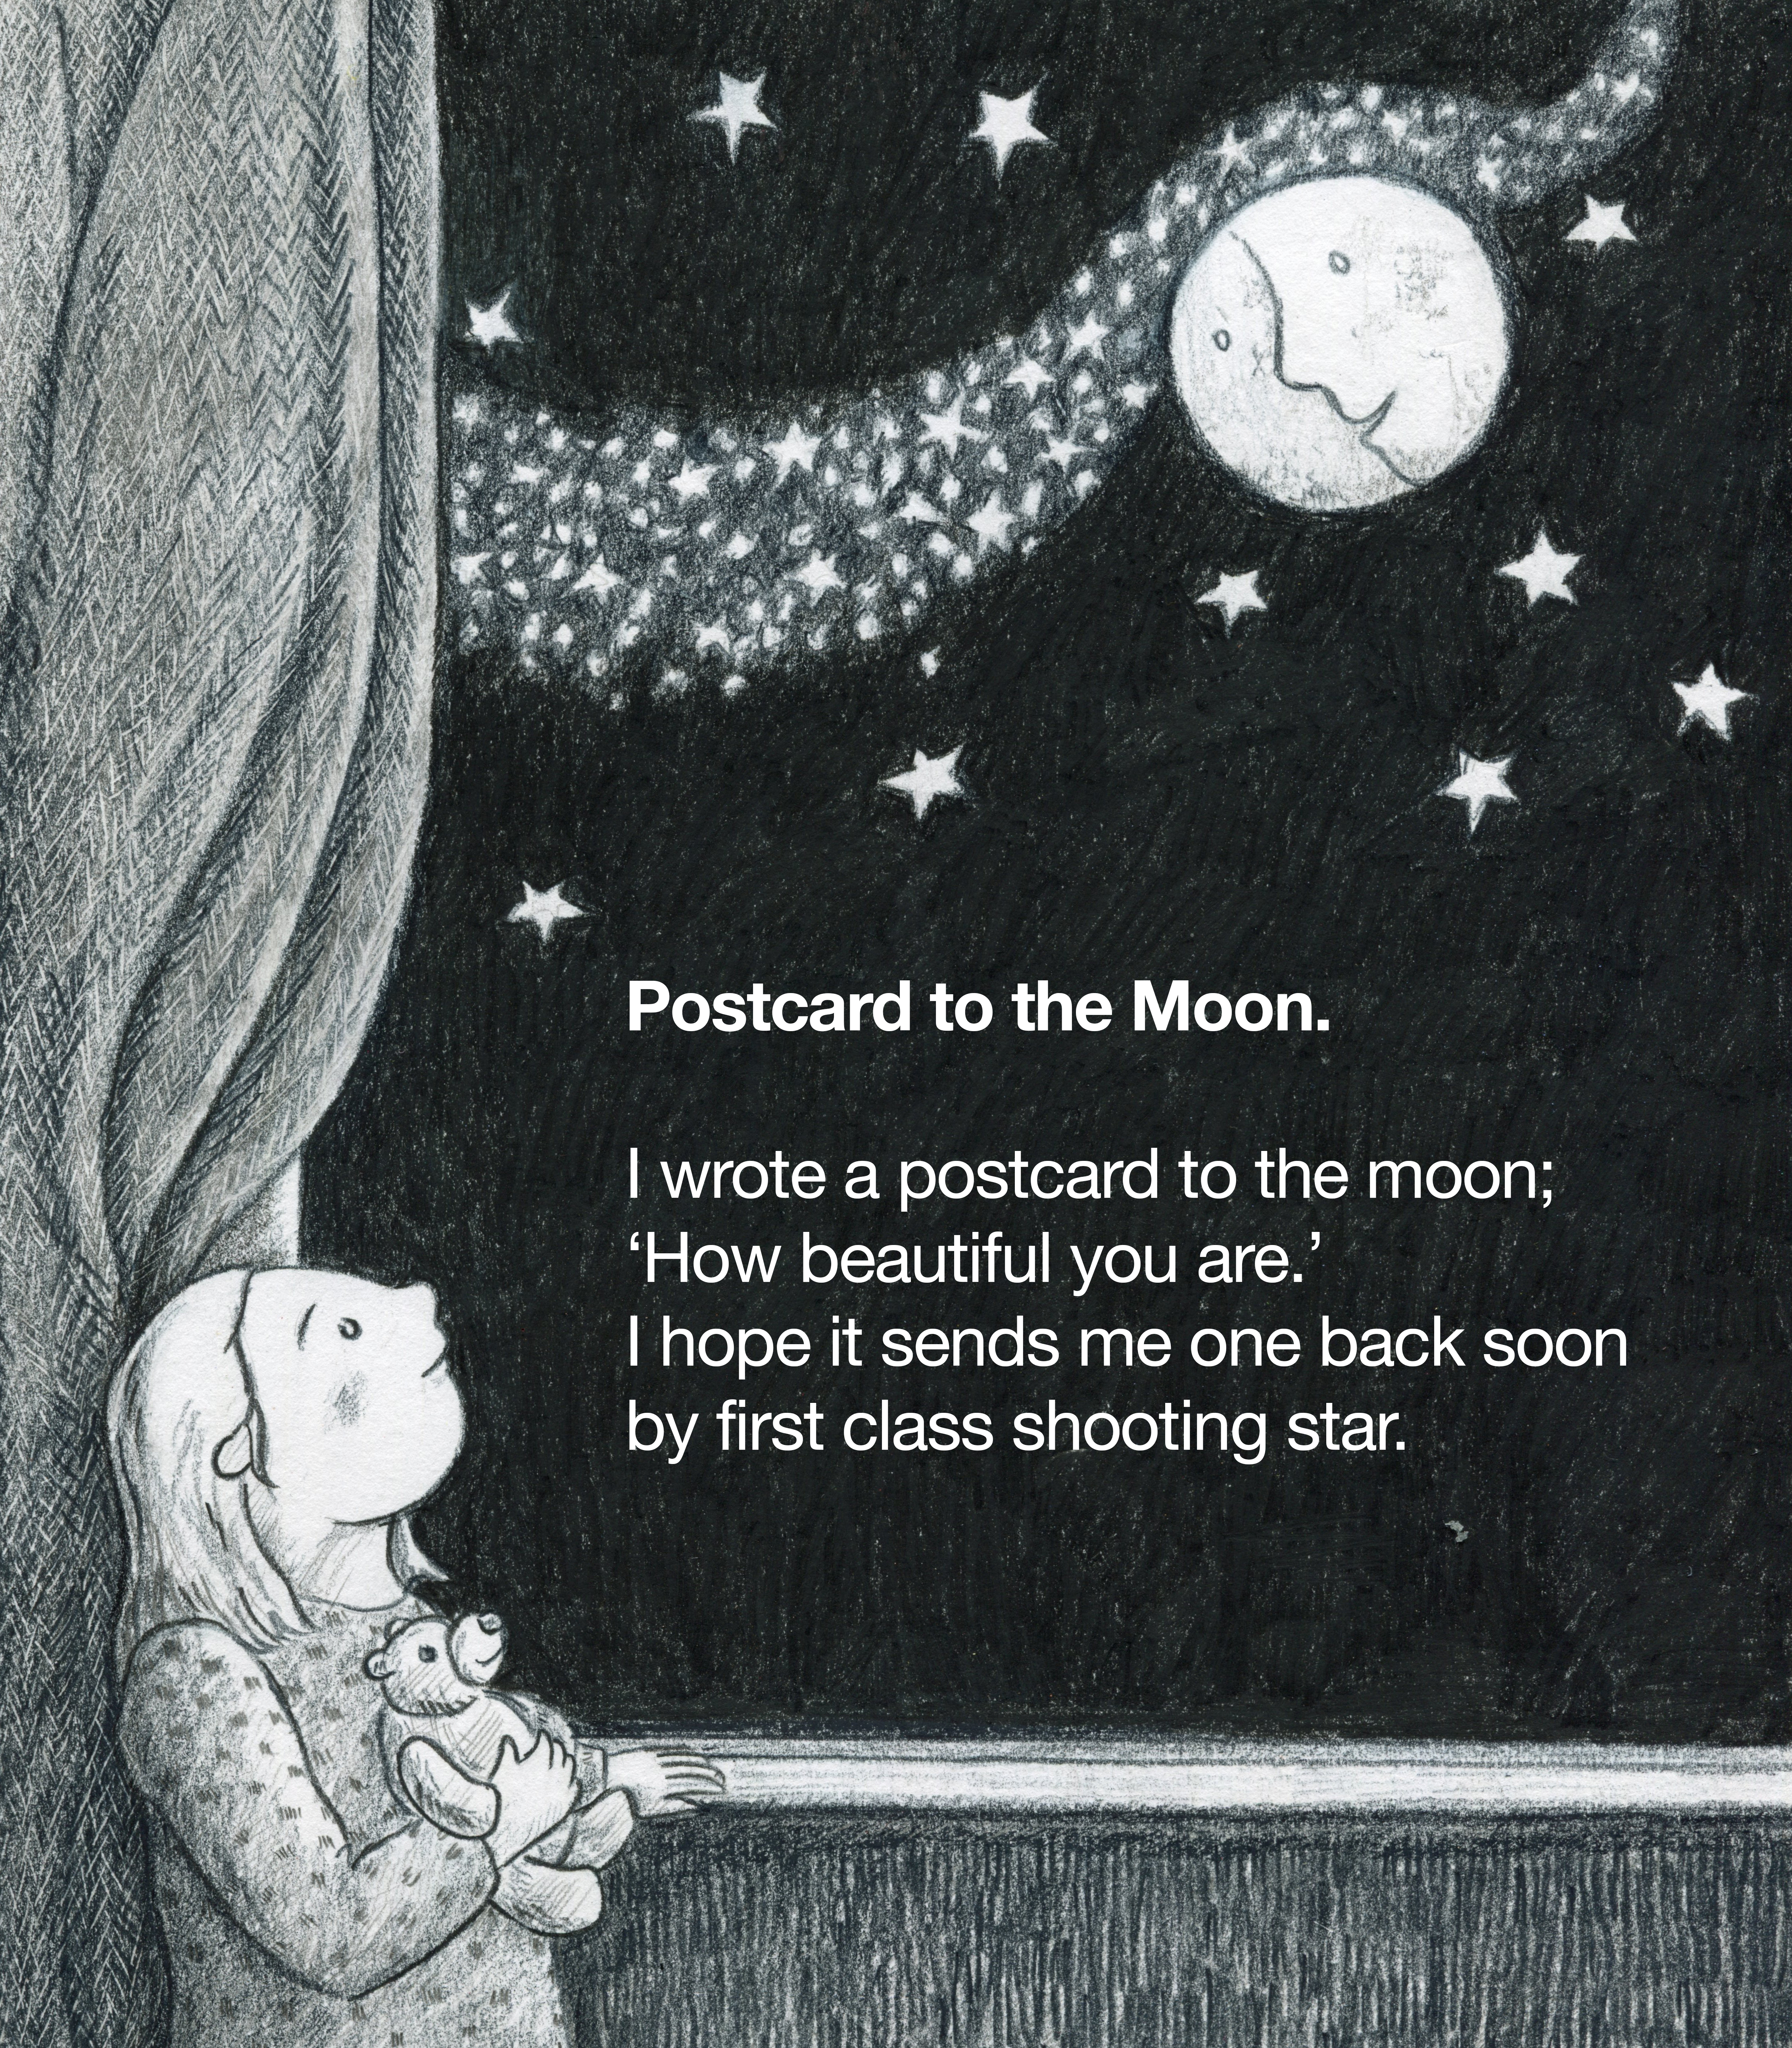 Postcard to the moon